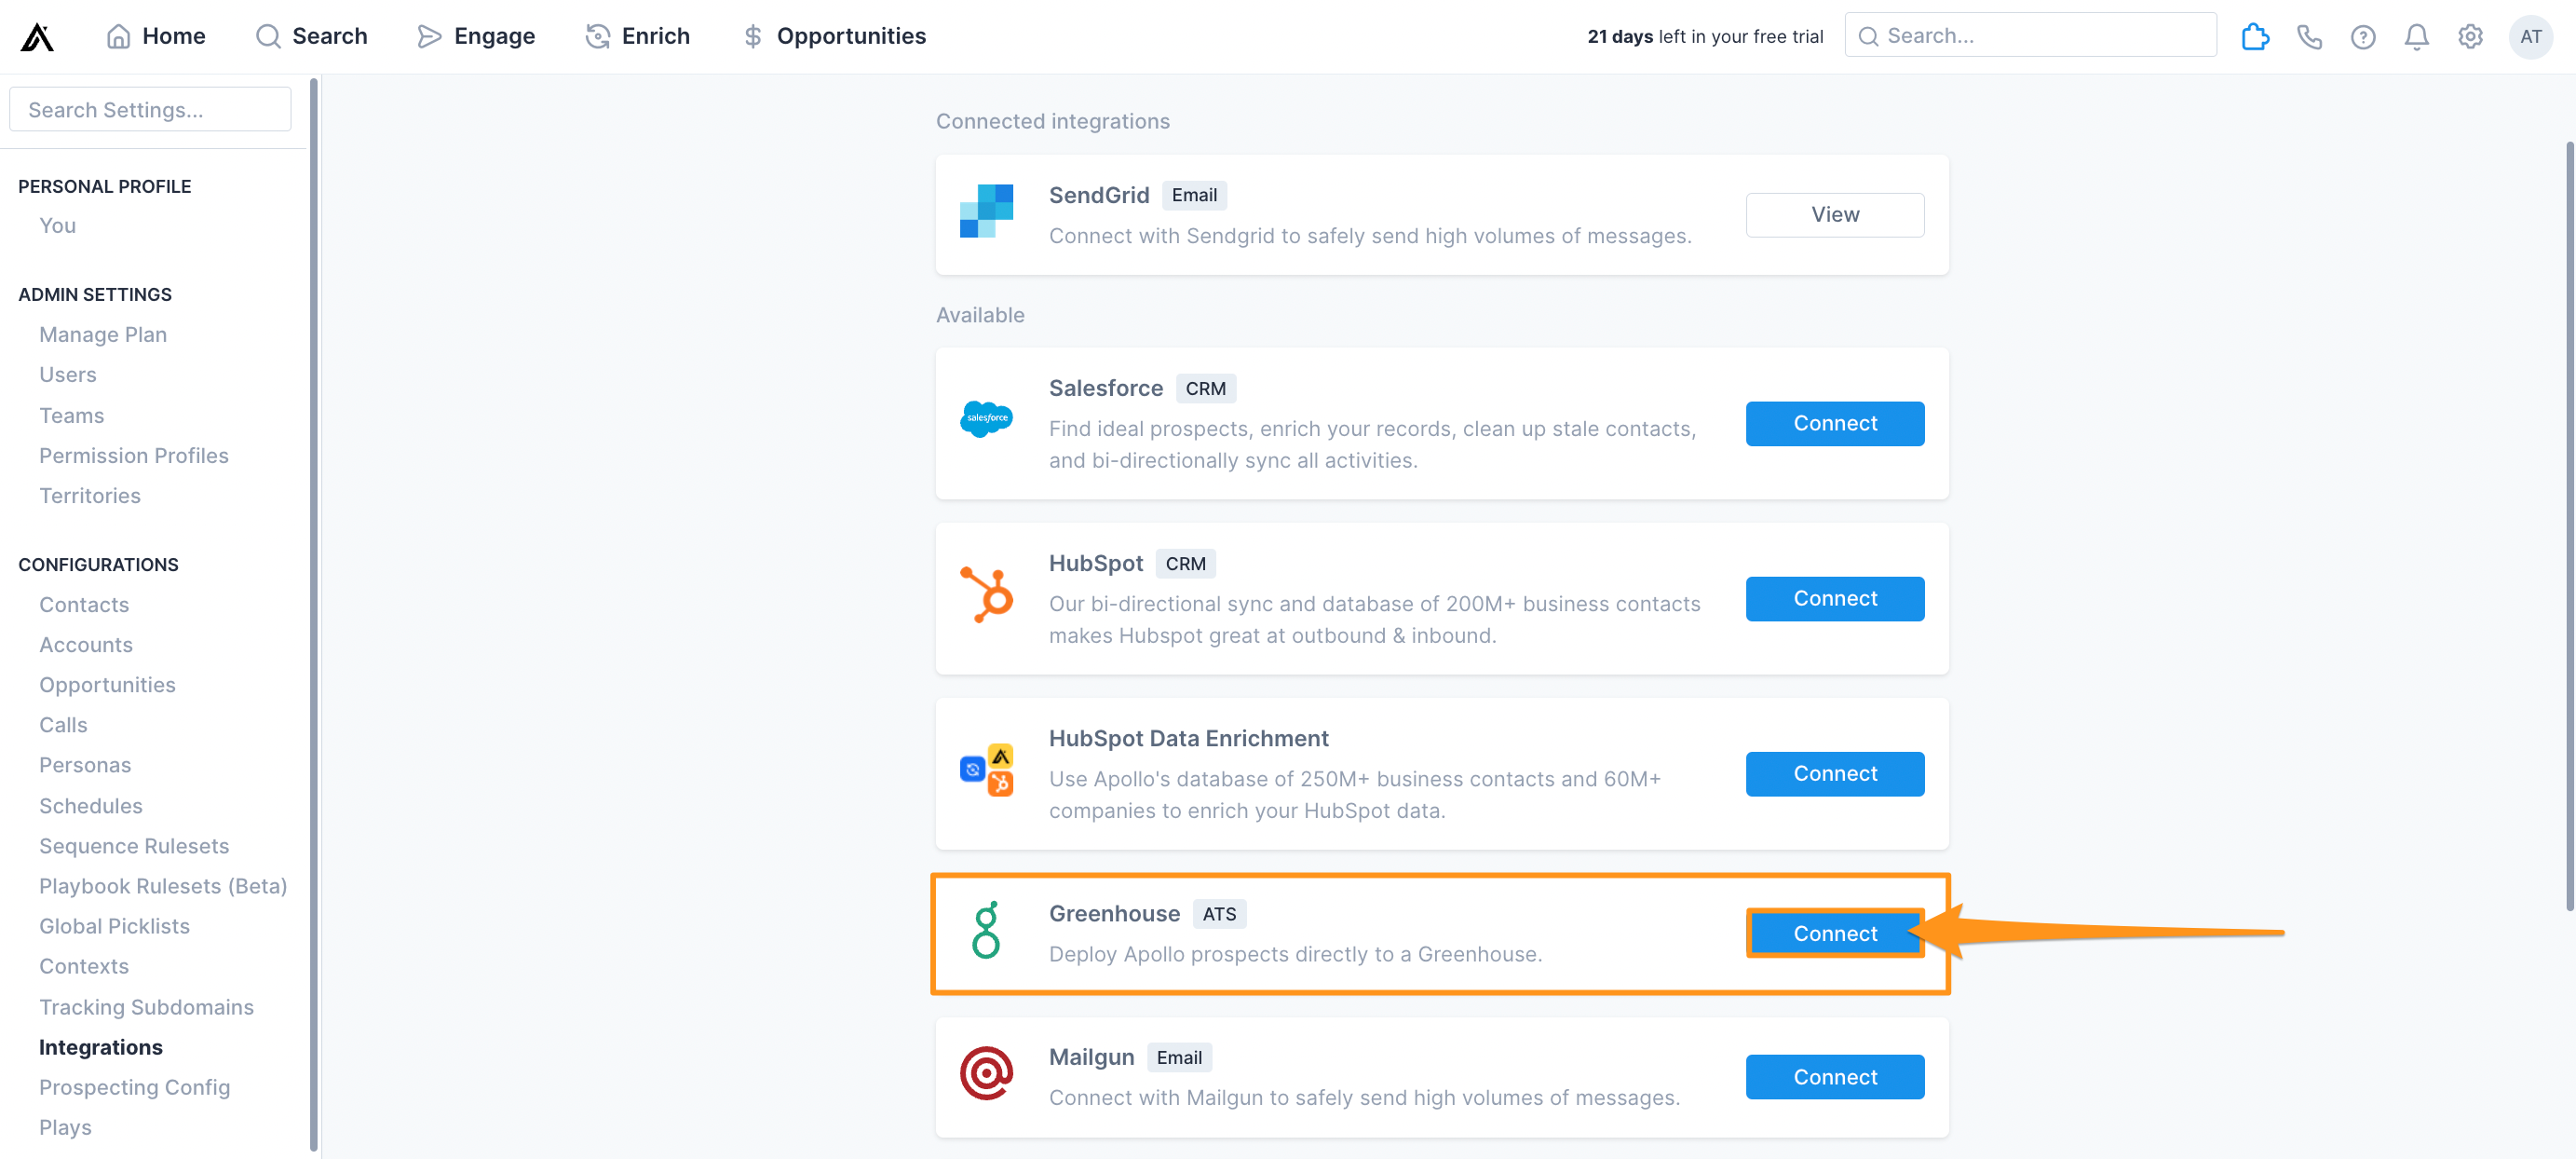 Greenhouse connect button on integrations page